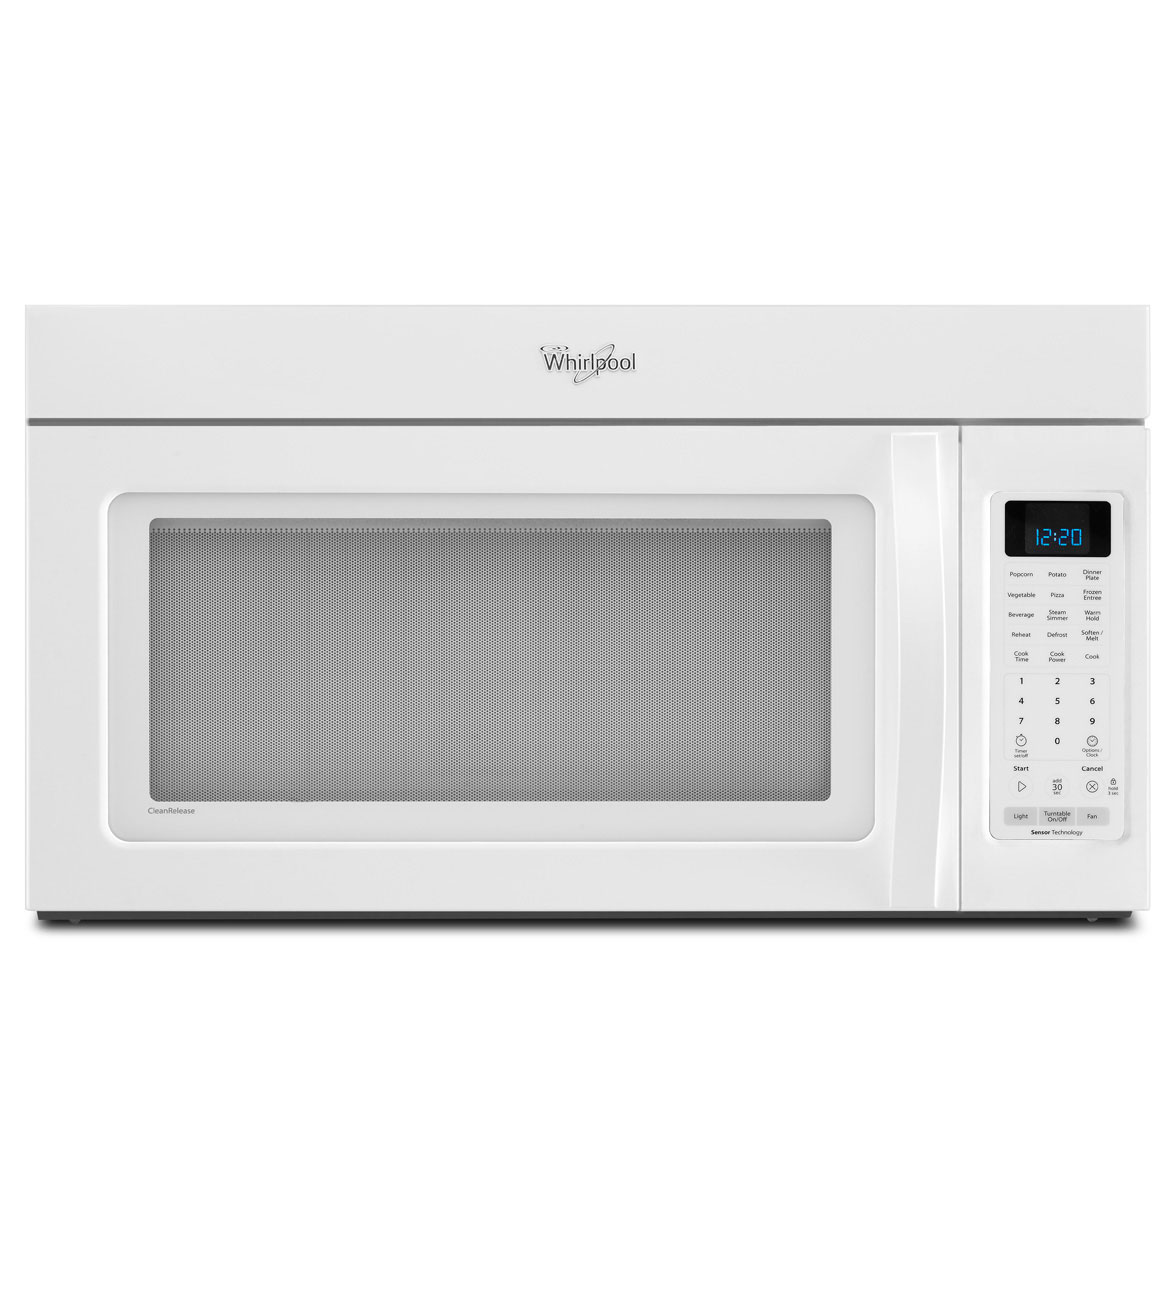 Whirlpool WMH53520AW 2.0 cu. ft. Over-the-Range Microwave Oven with 400